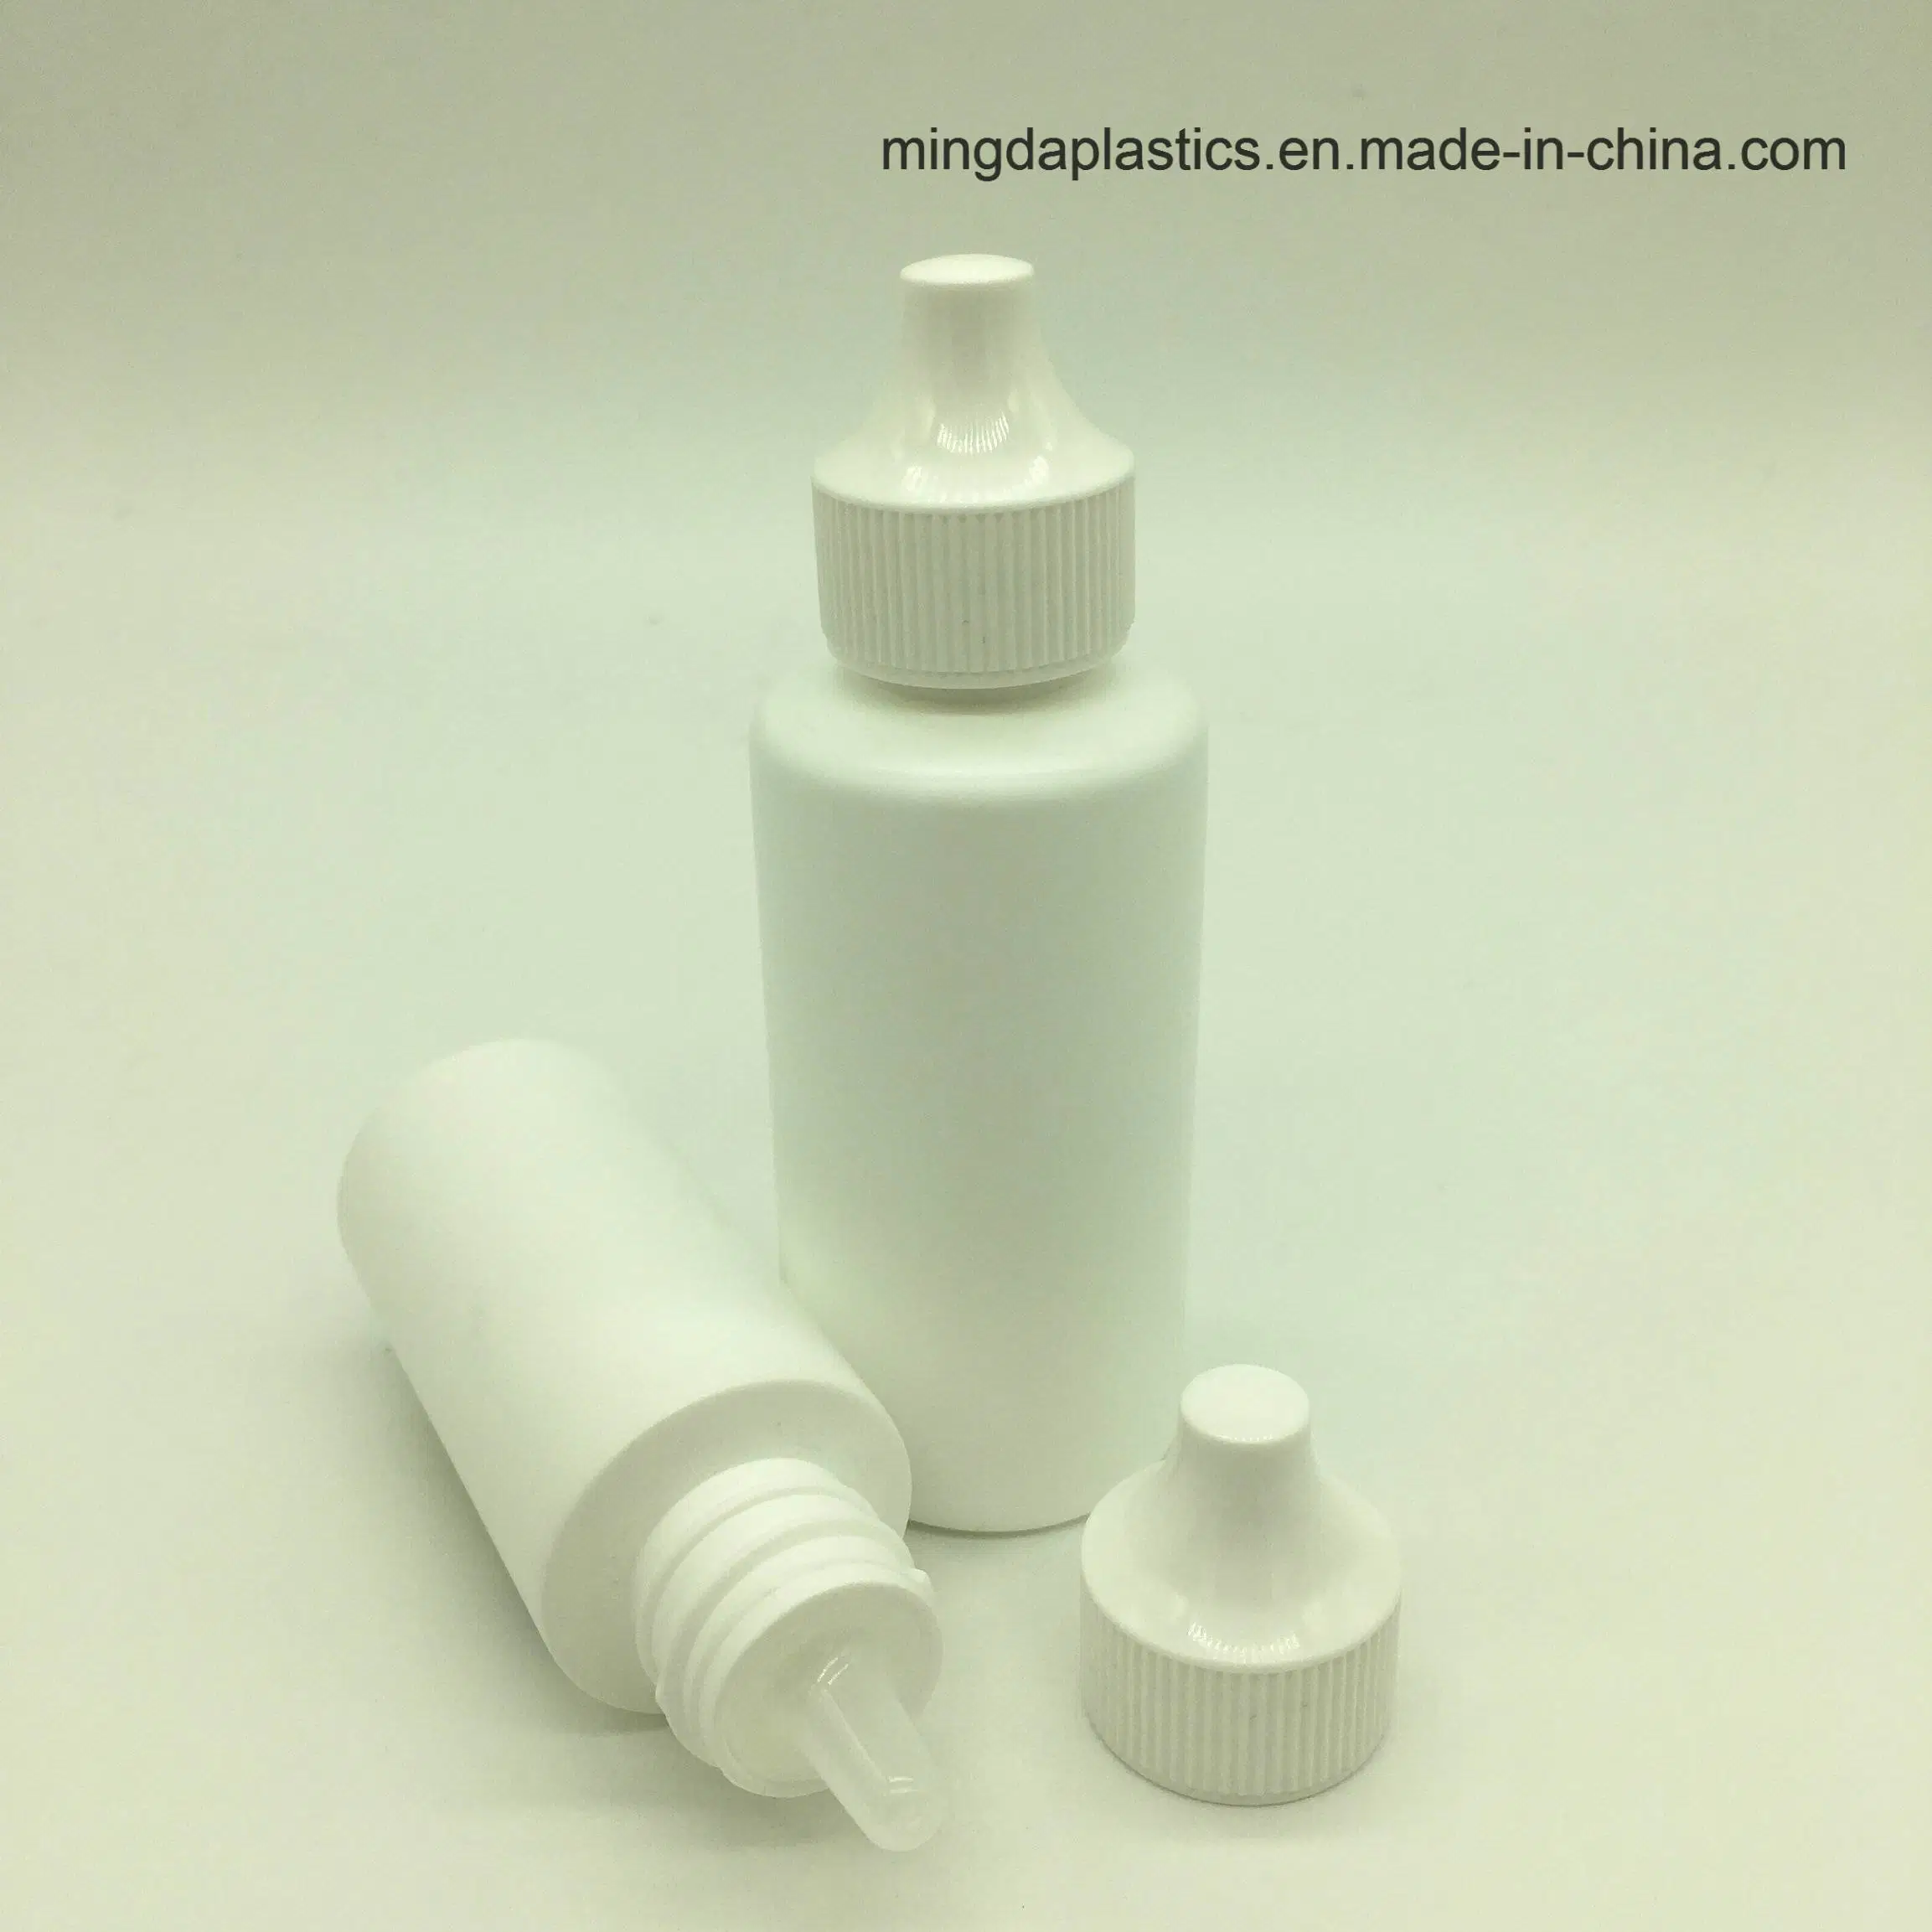 30cc Pet/HDPE Plastic Eye-Drop Bottle Medicine Tablet Health Care Products Container/Jar